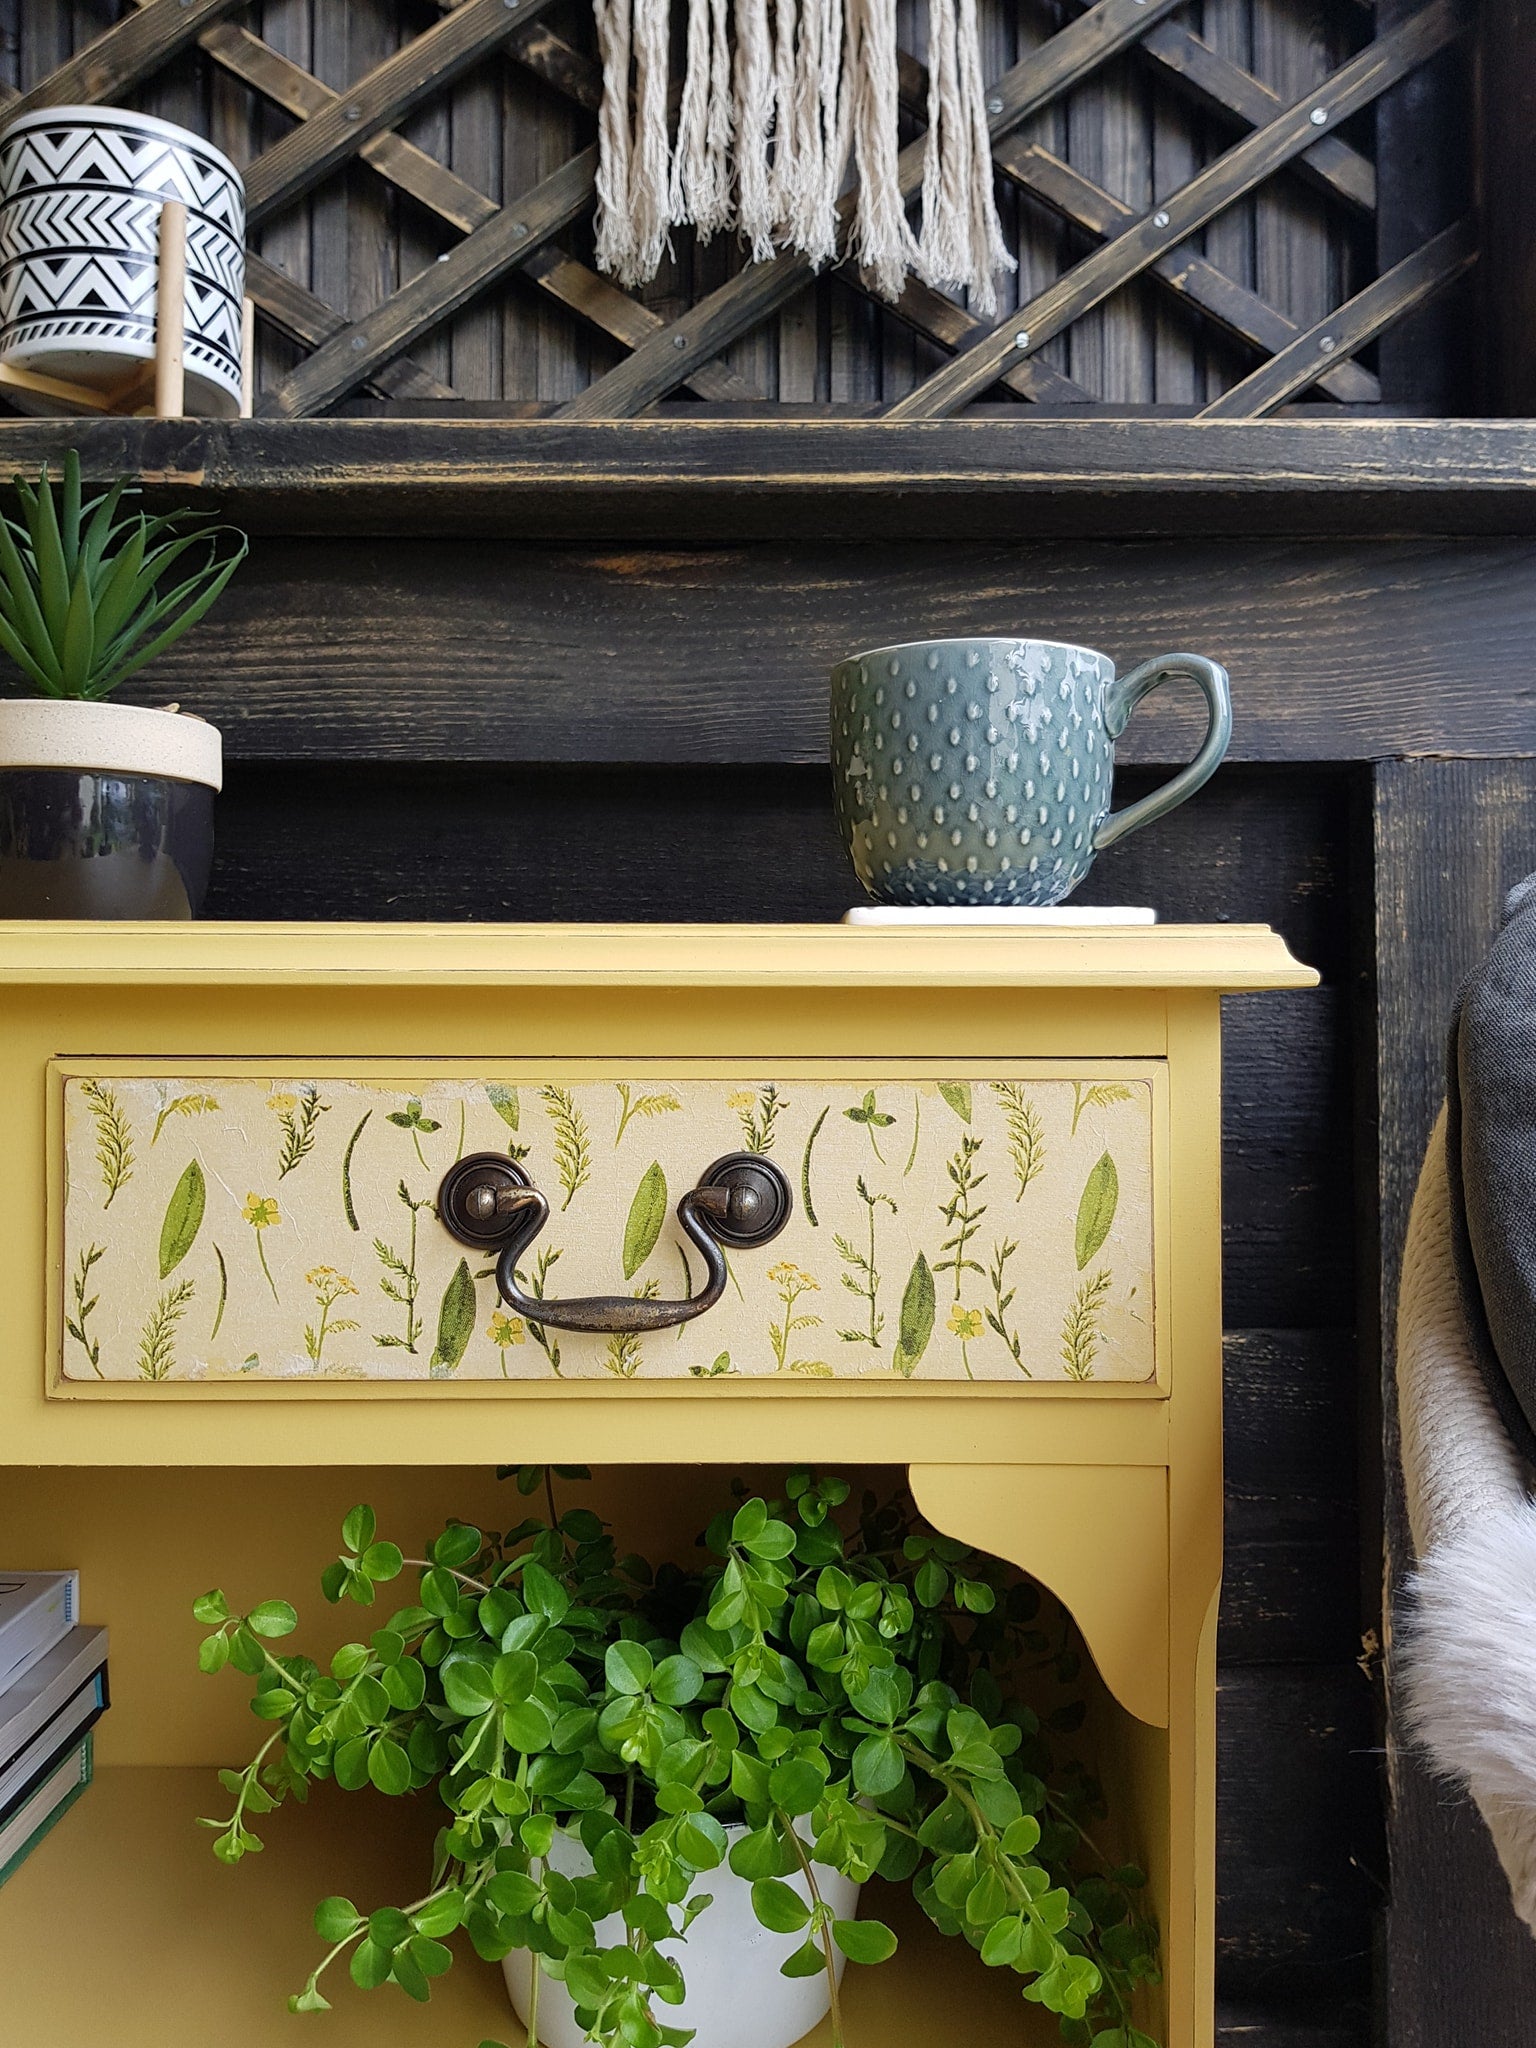 Frenchic Paint | Lazy Range - Hot As Mustard by Weirs of Baggot St